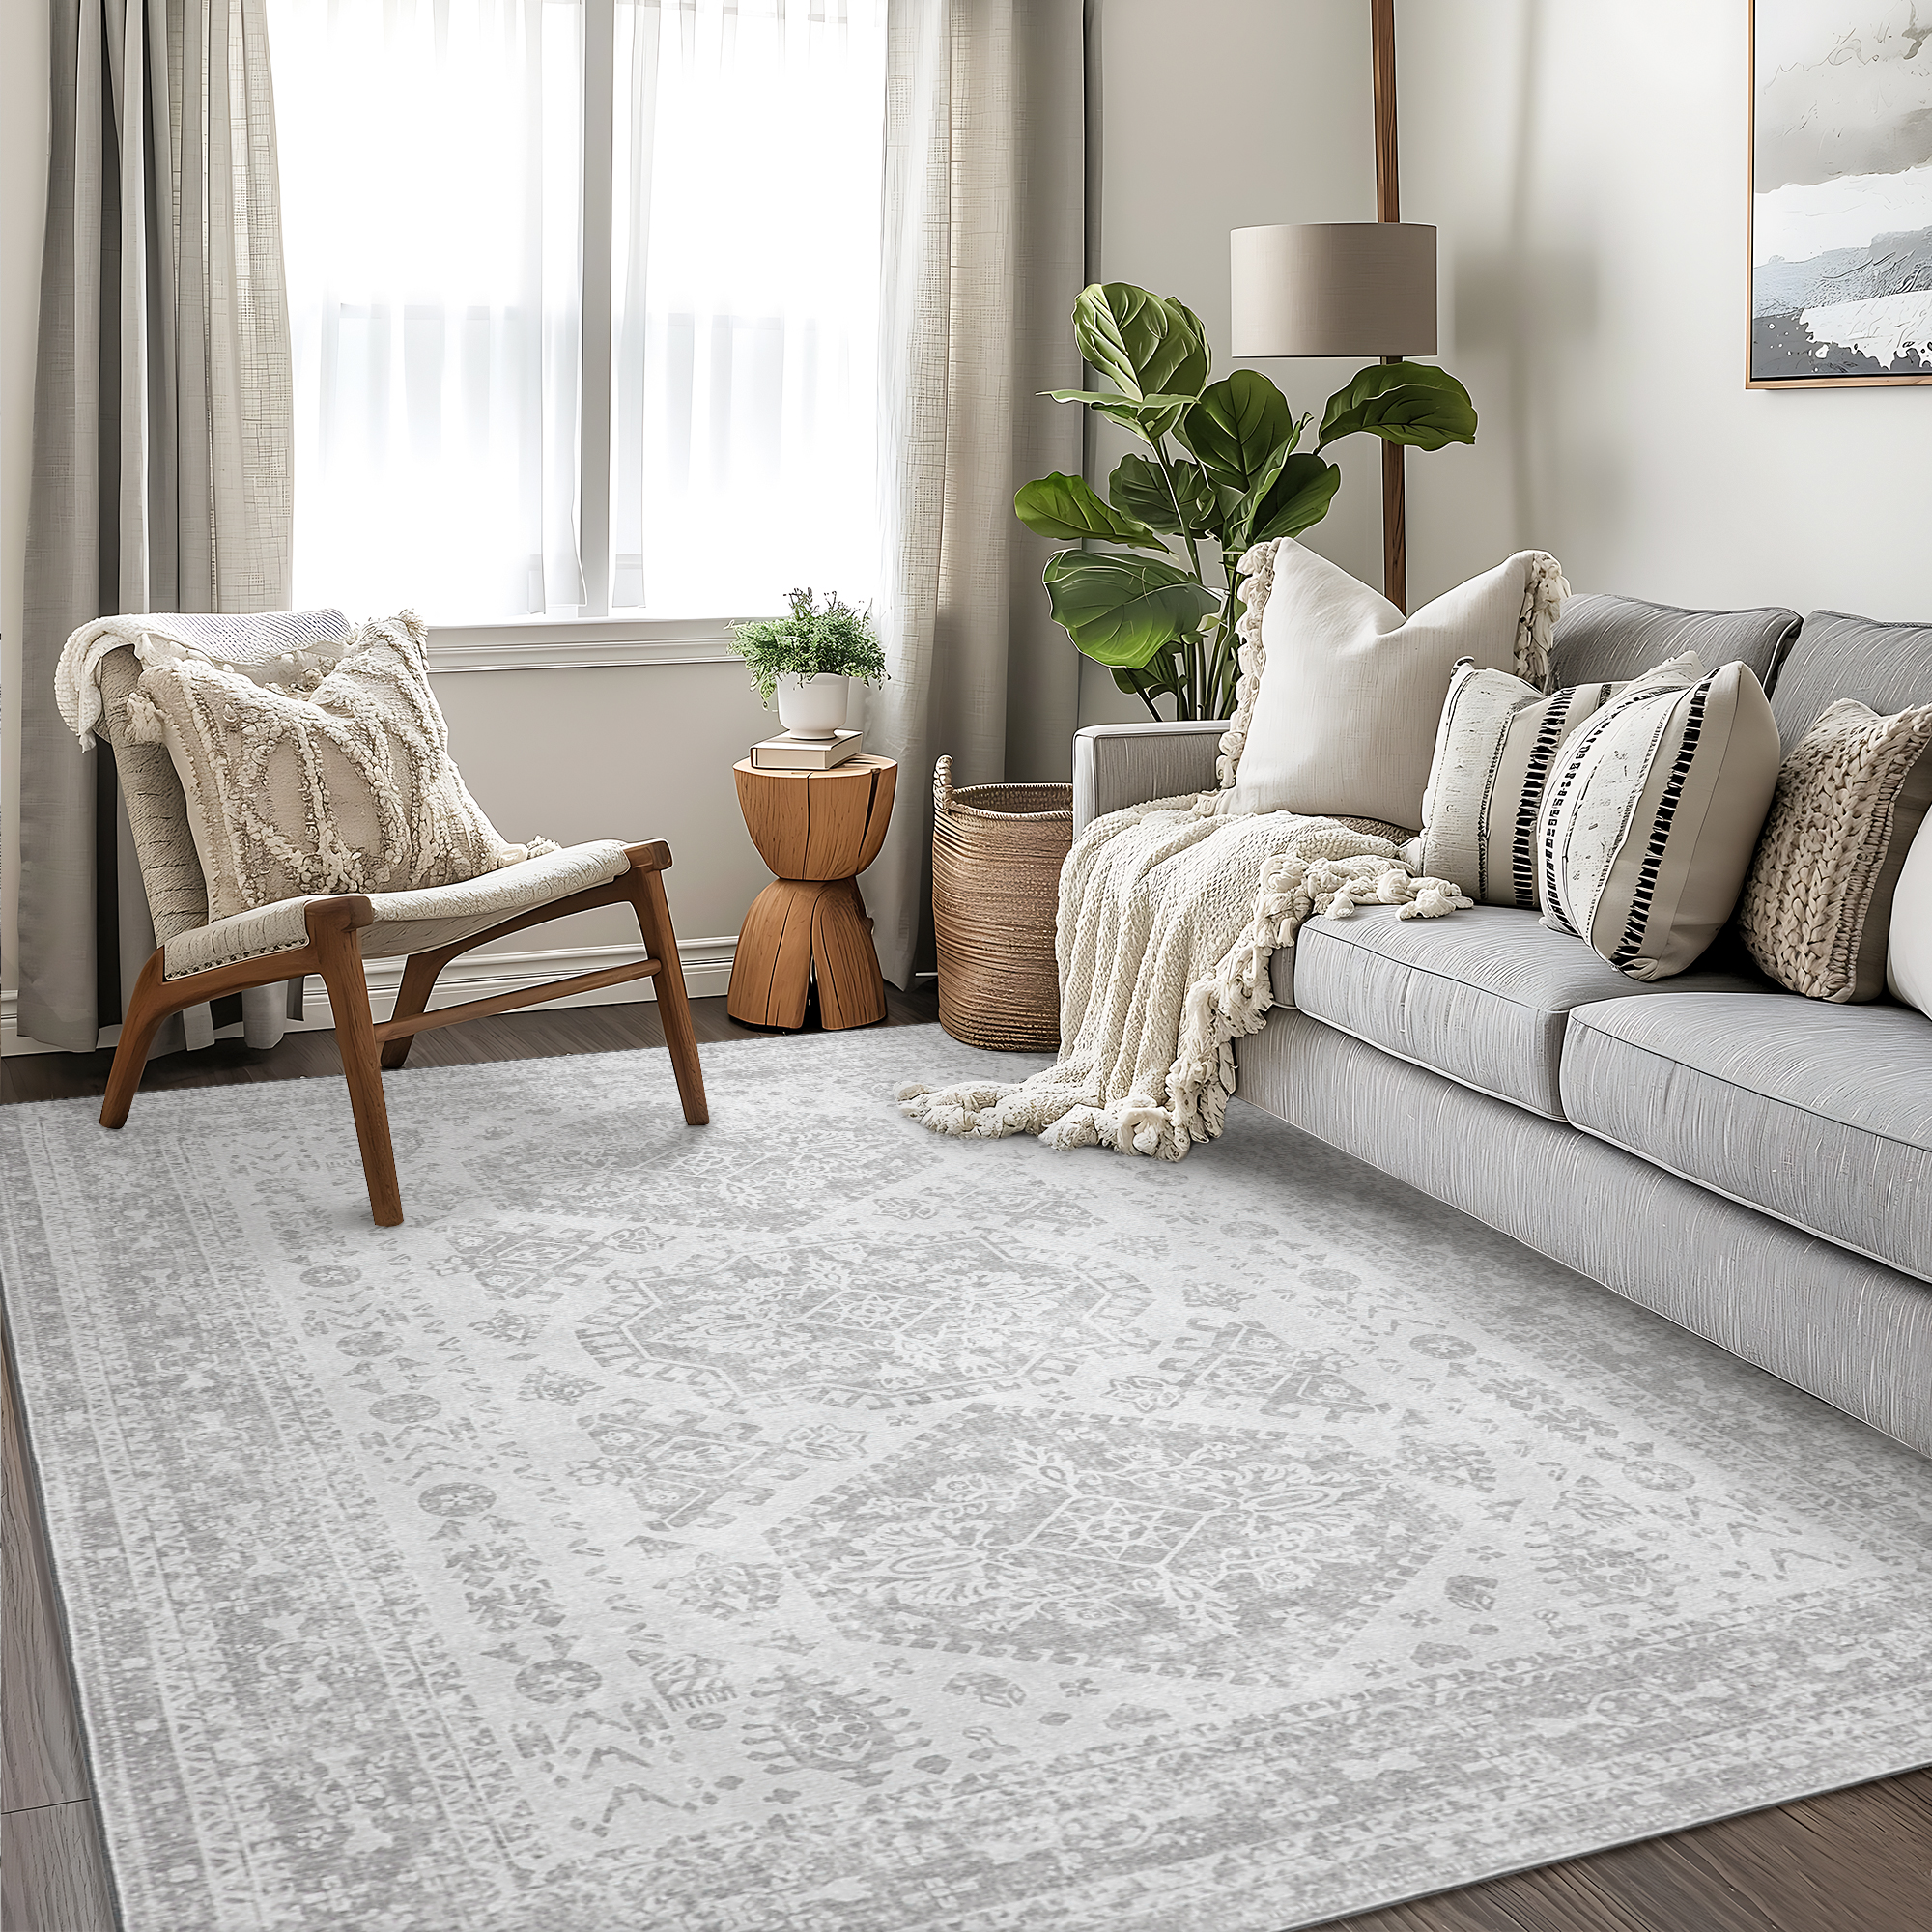 KUETH Area Rugs for Living Room 3x5 Machine Washable Bedroom Rugs Distressed Vintage Print Gray Large Throw Rug Dining Room Aesthetic, Non Slip Carpet with Gripper - image 1 of 7